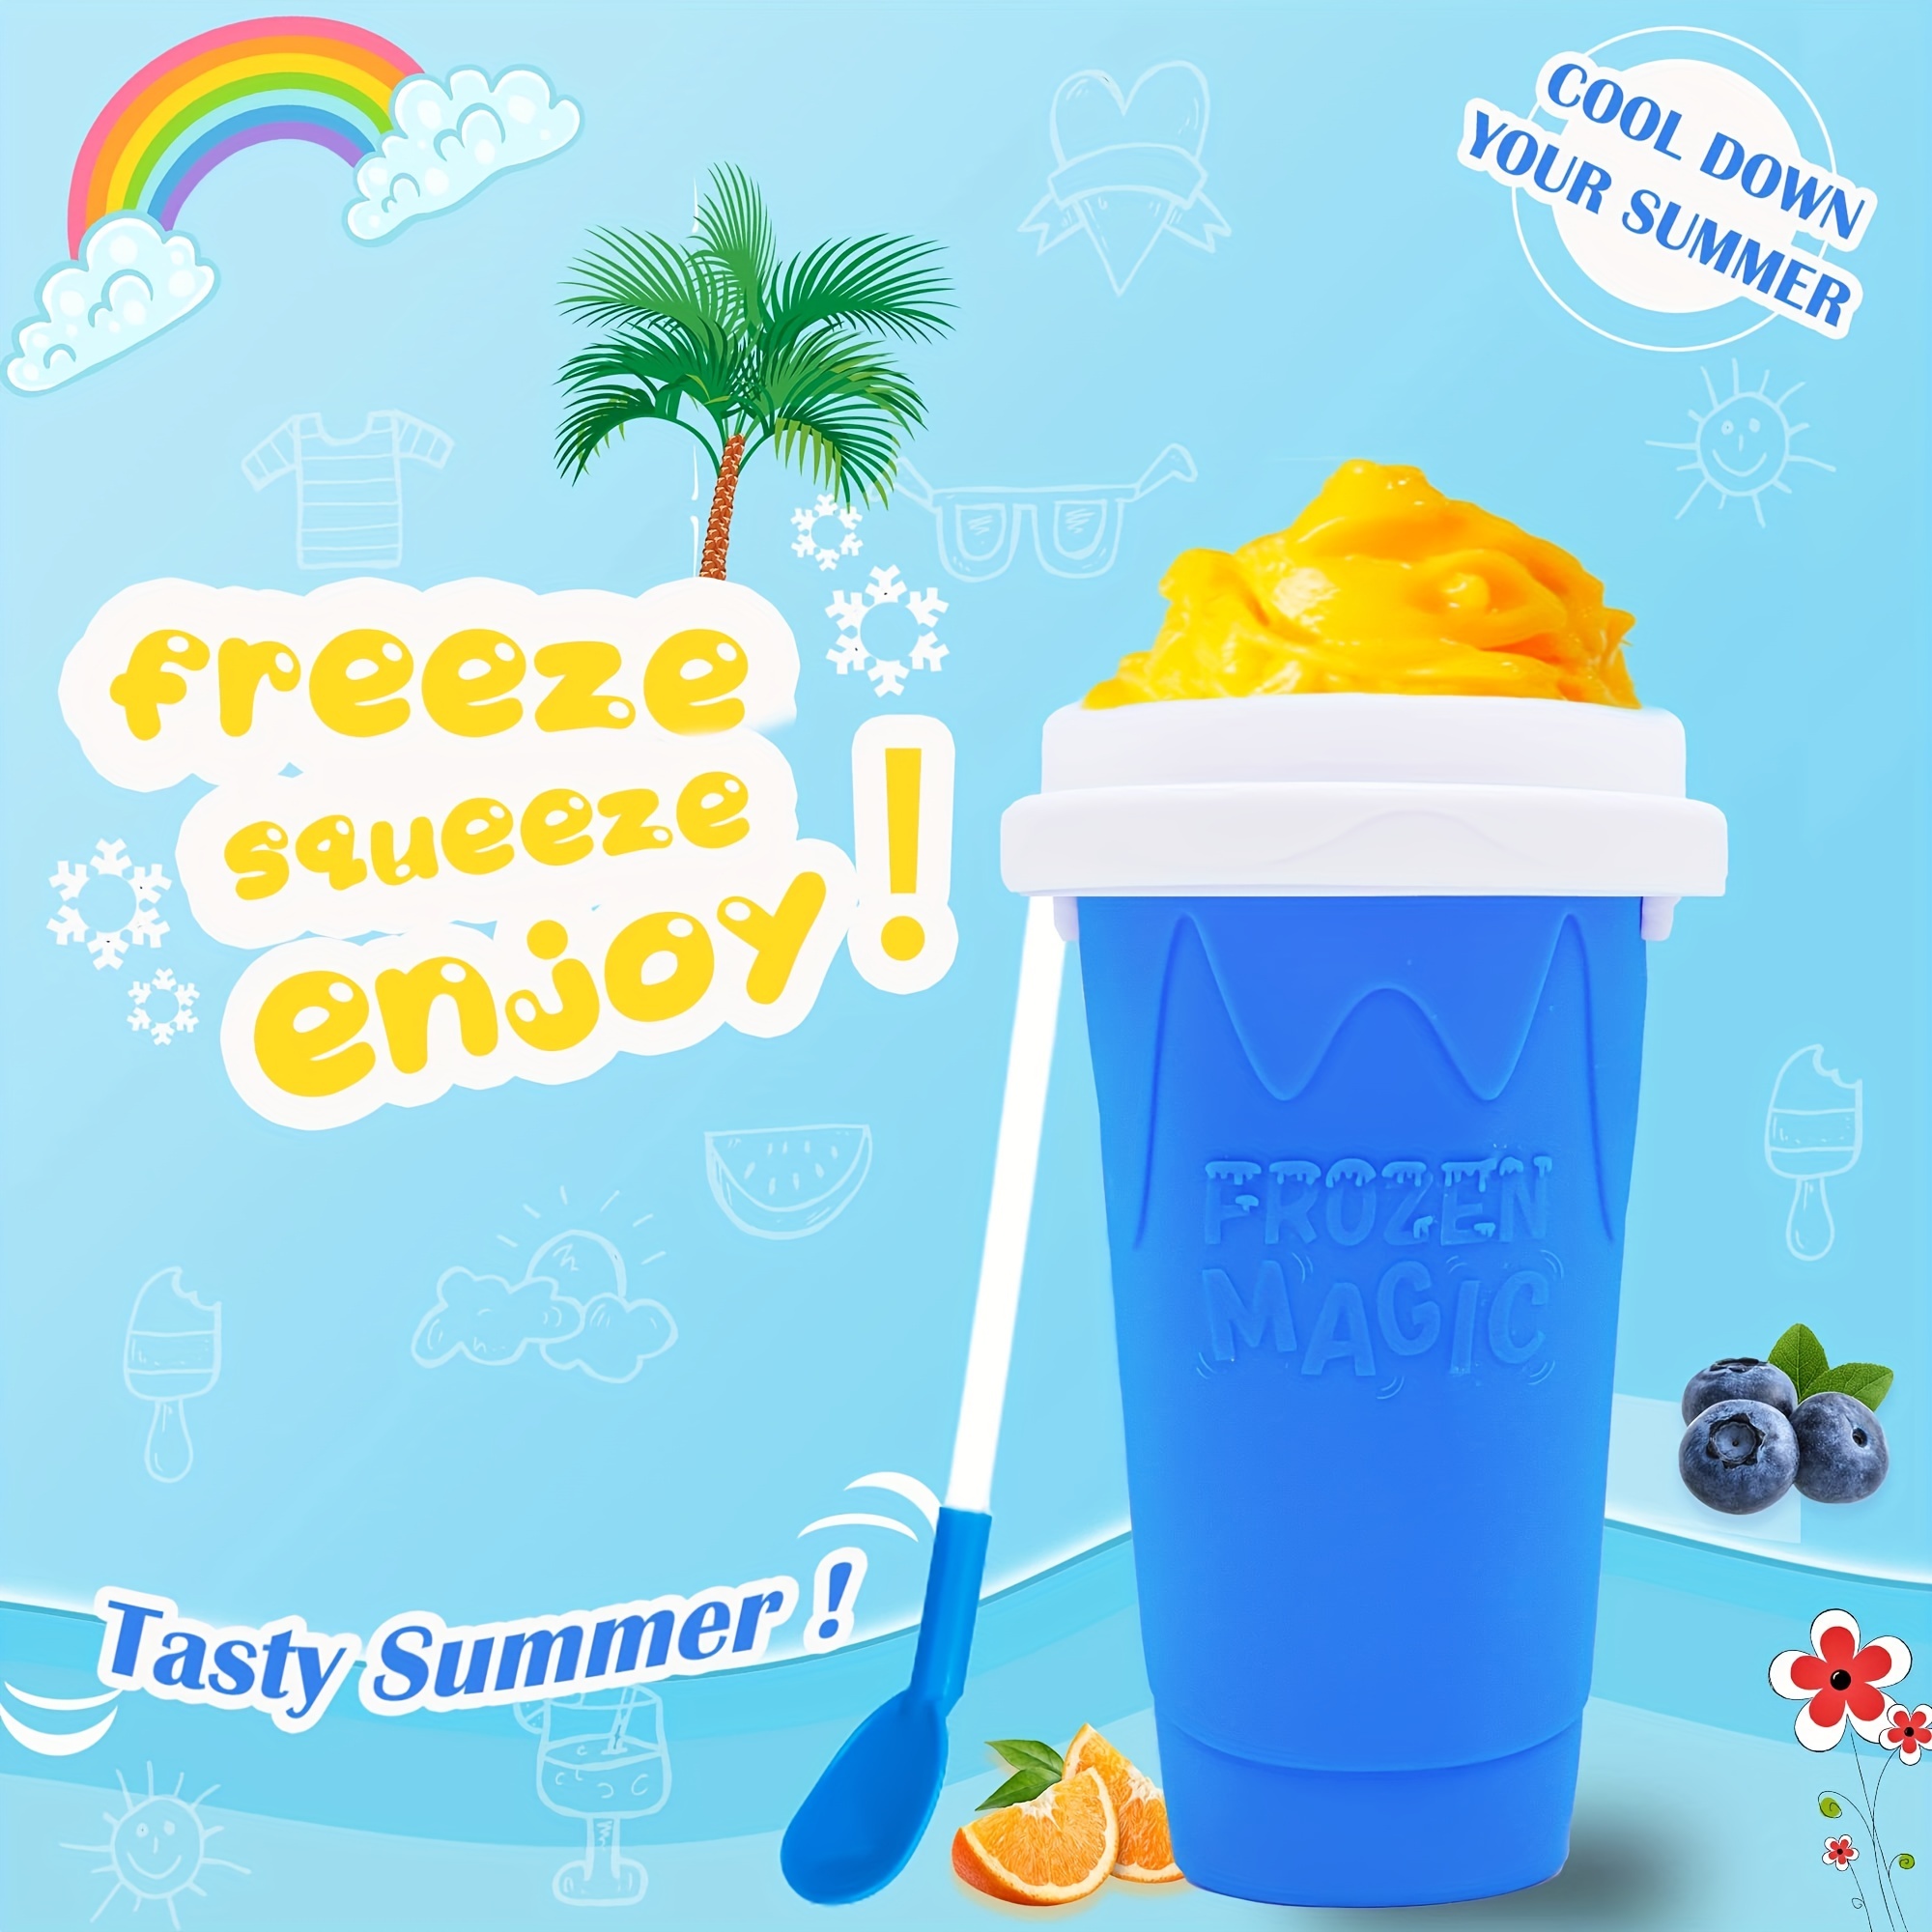  Frozen Magic Slushy Maker Cup,TIK TOK Quick Frozen Smoothies Cup,Slushy  Squeeze Cup Slushie Maker Cup Ice Cup,Cool Stuff Ice Cream Maker for Kids  Teens Family: Home & Kitchen